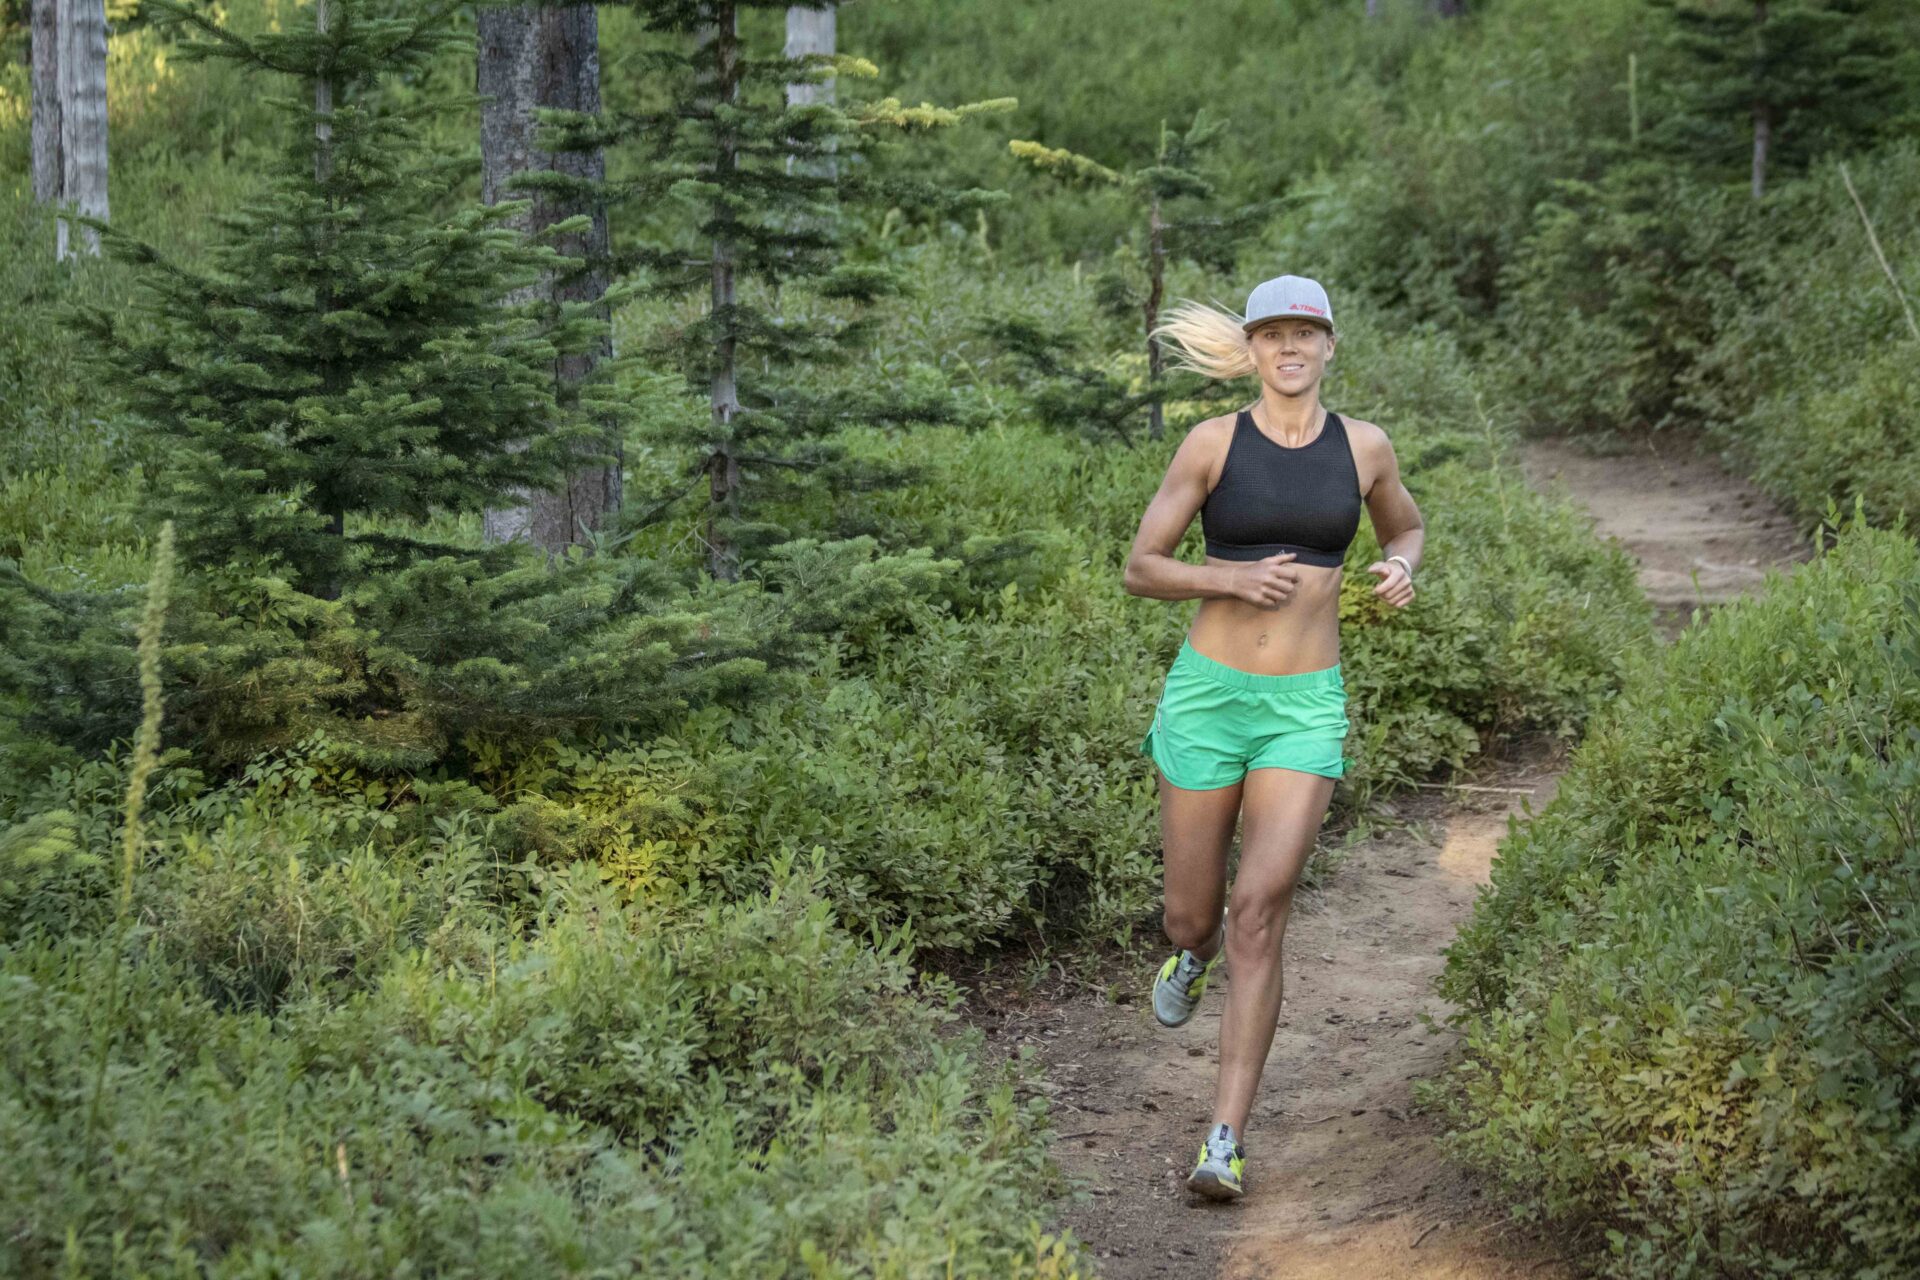 Woman trail runner cruising along a forested singletrack trail at Mt. Spokane State Park.